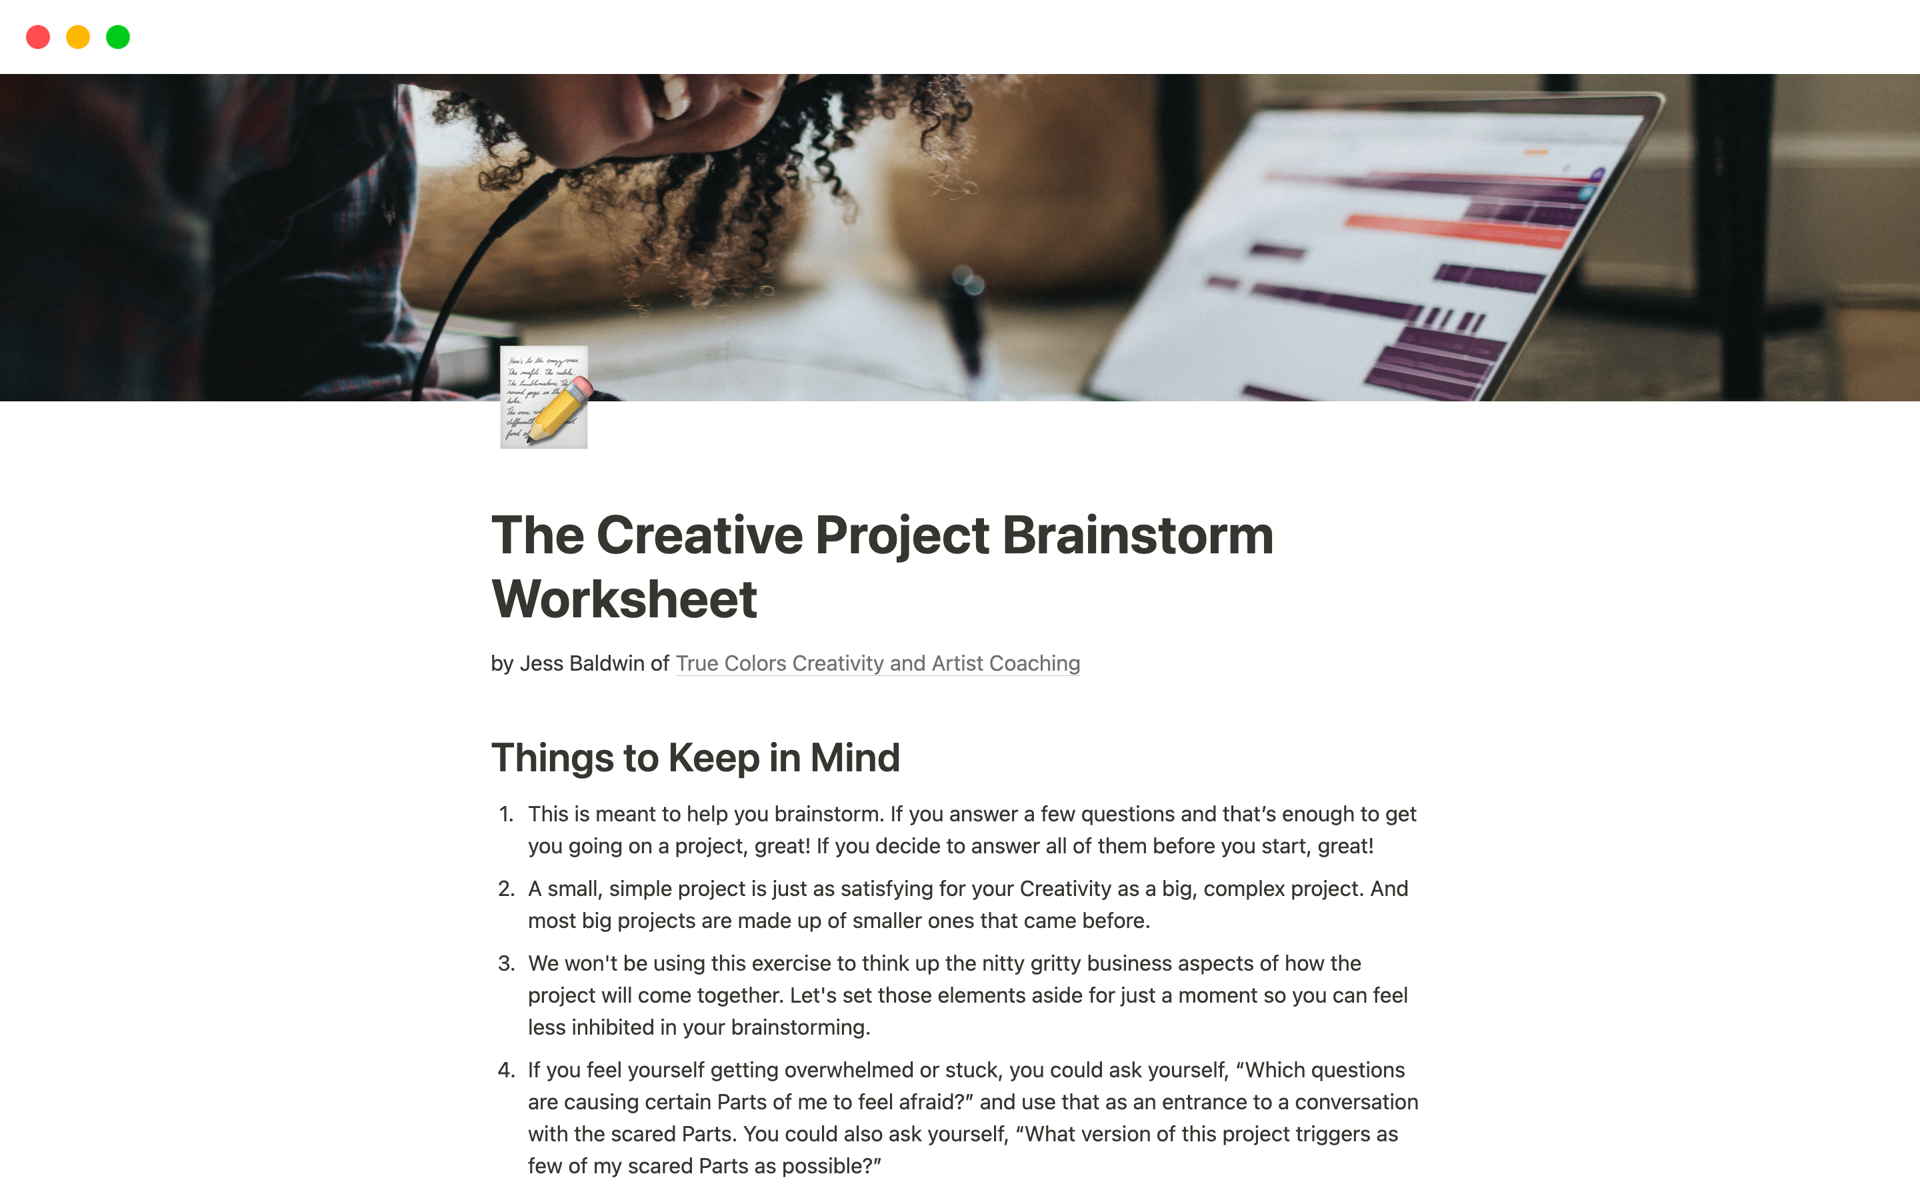 Break out of your subconscious creative project limitations by brainstorming around a wide range of specific elements.